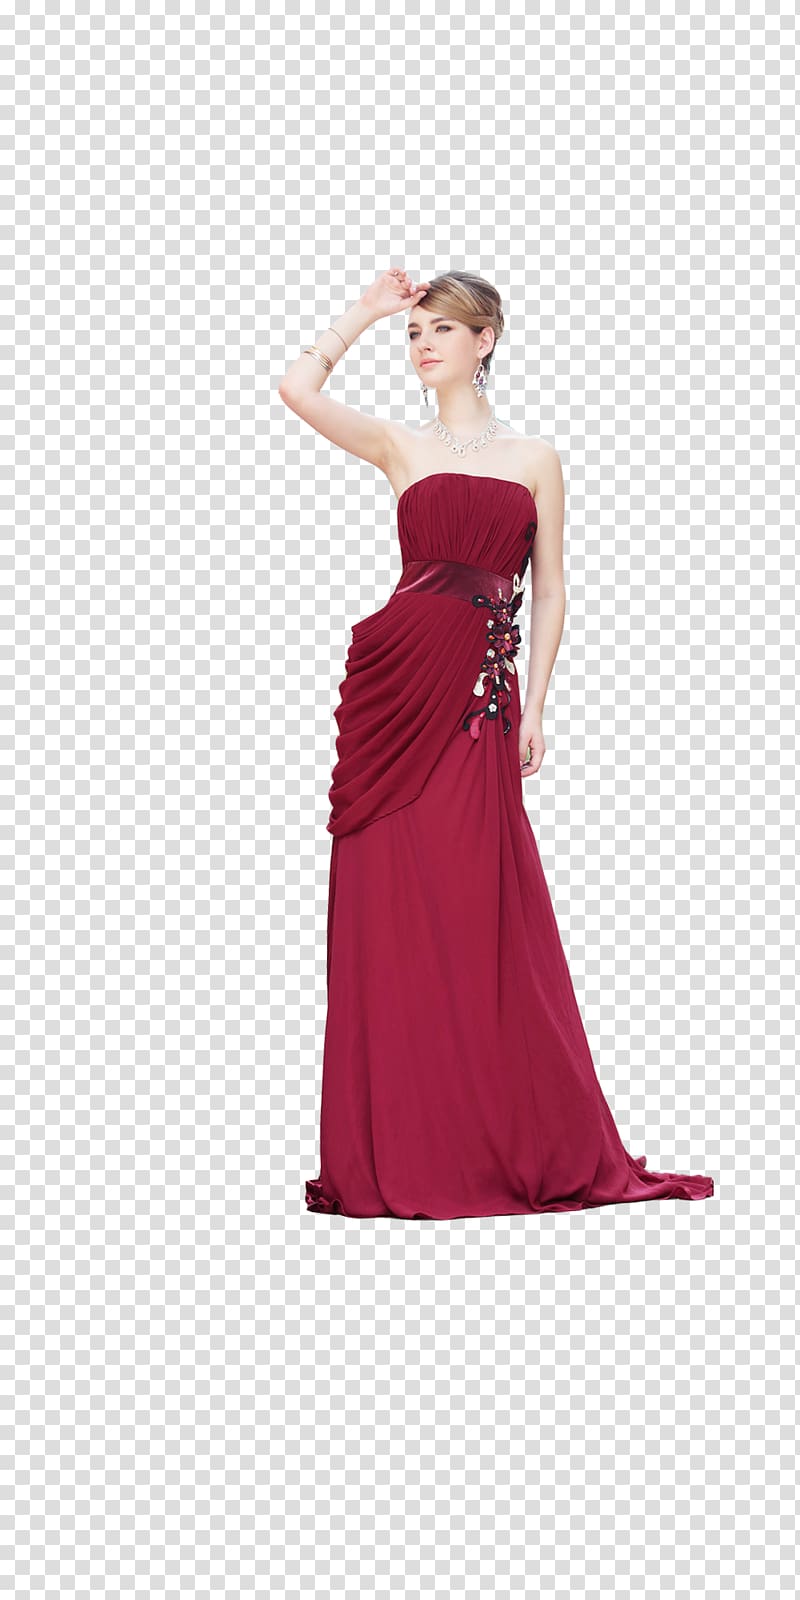 Red Wine Wedding dress, Wine red dress beauty transparent background PNG clipart